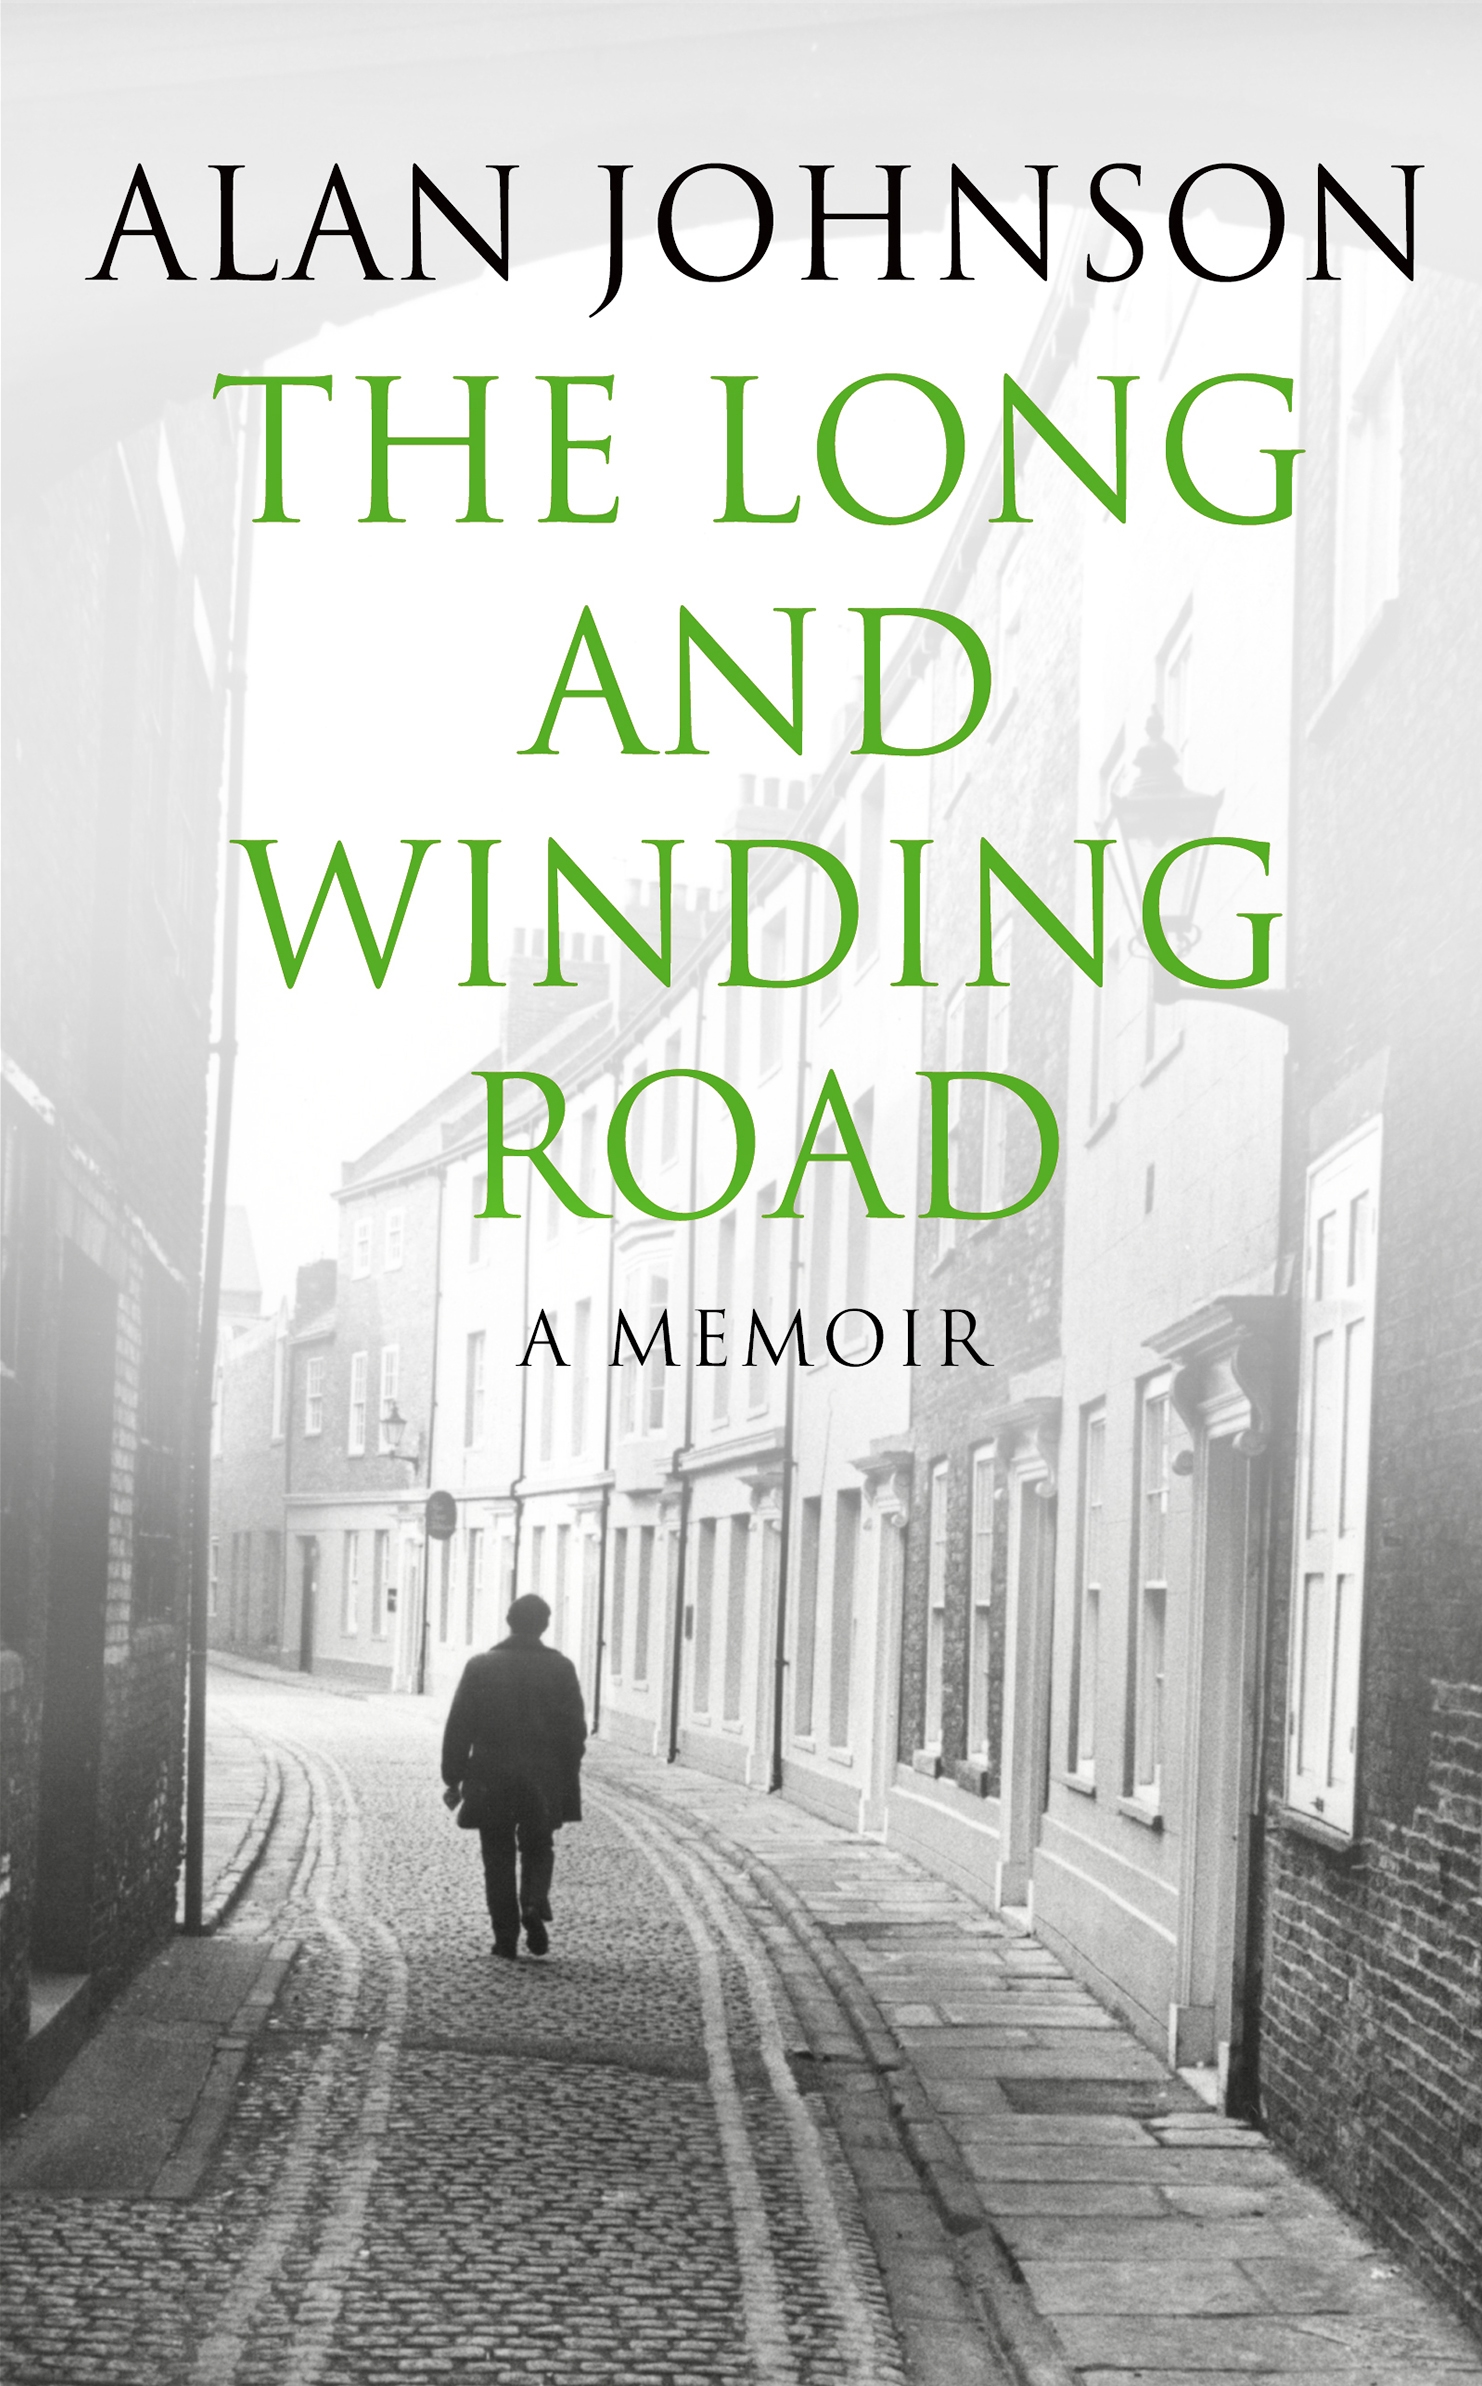 The Long and Winding Road by Alan Johnson - Penguin Books Australia